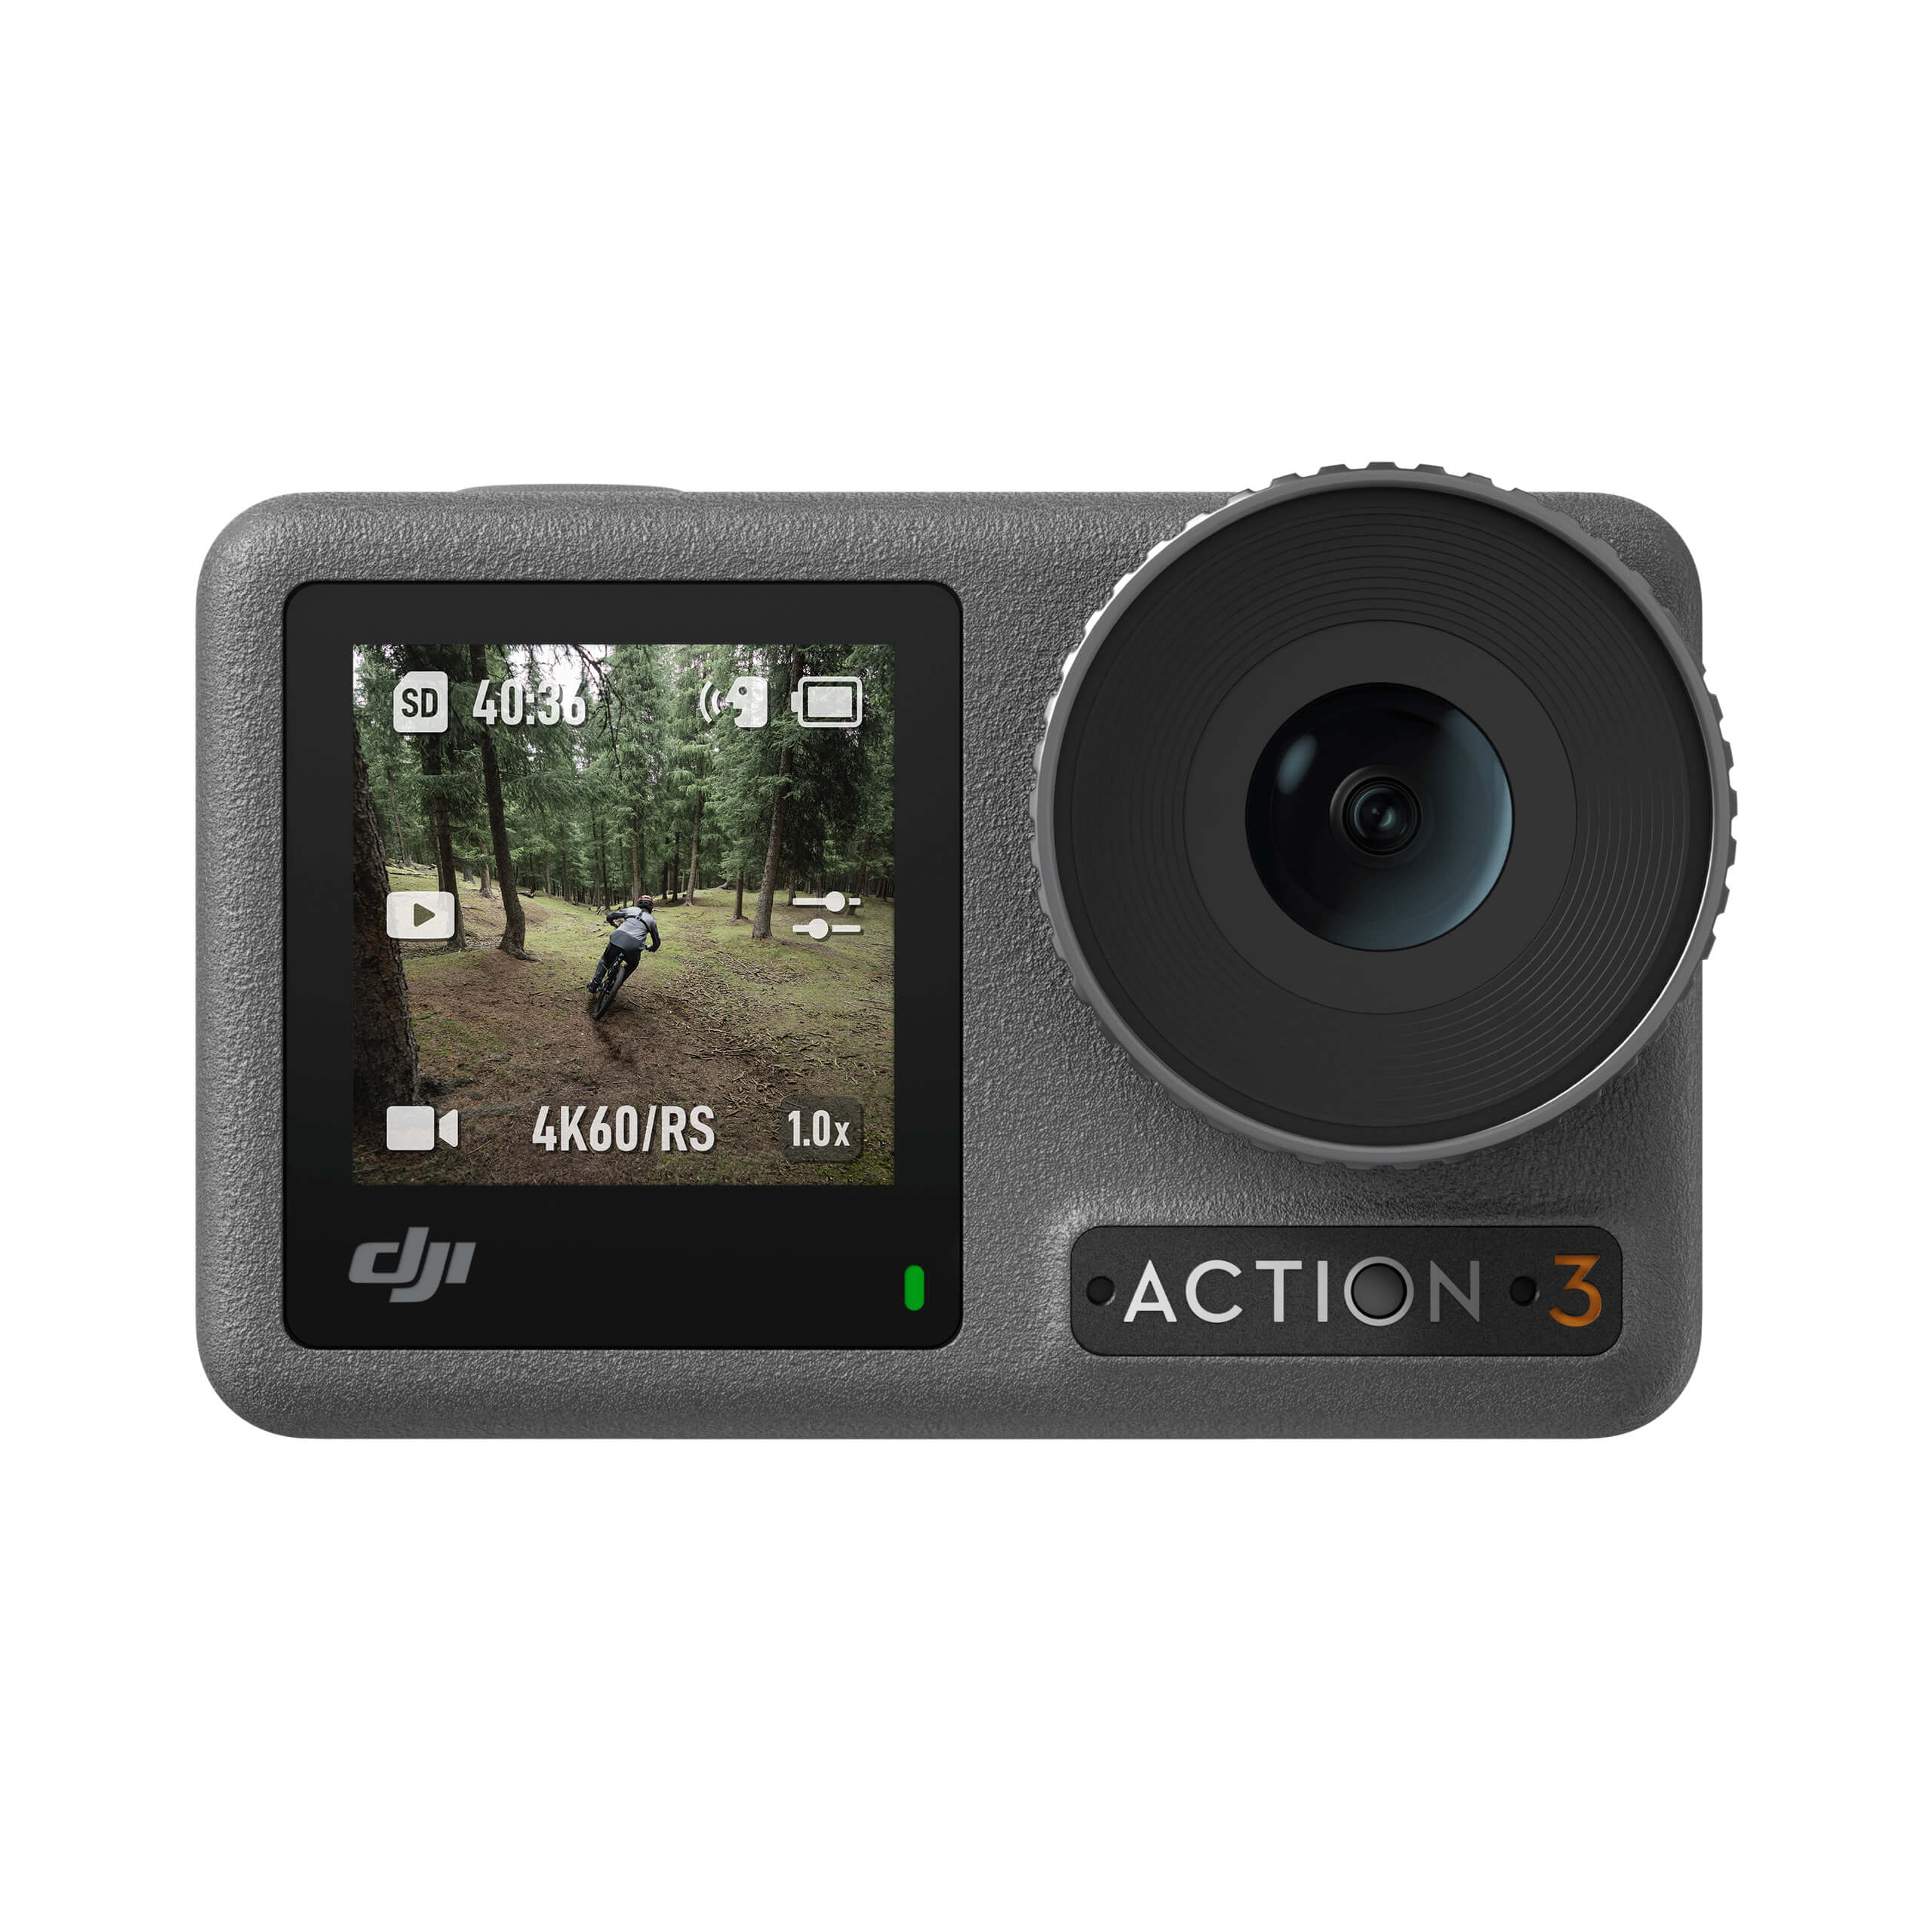 DJI Osmo Action 3 全能套裝 (黑色), , large image number 0